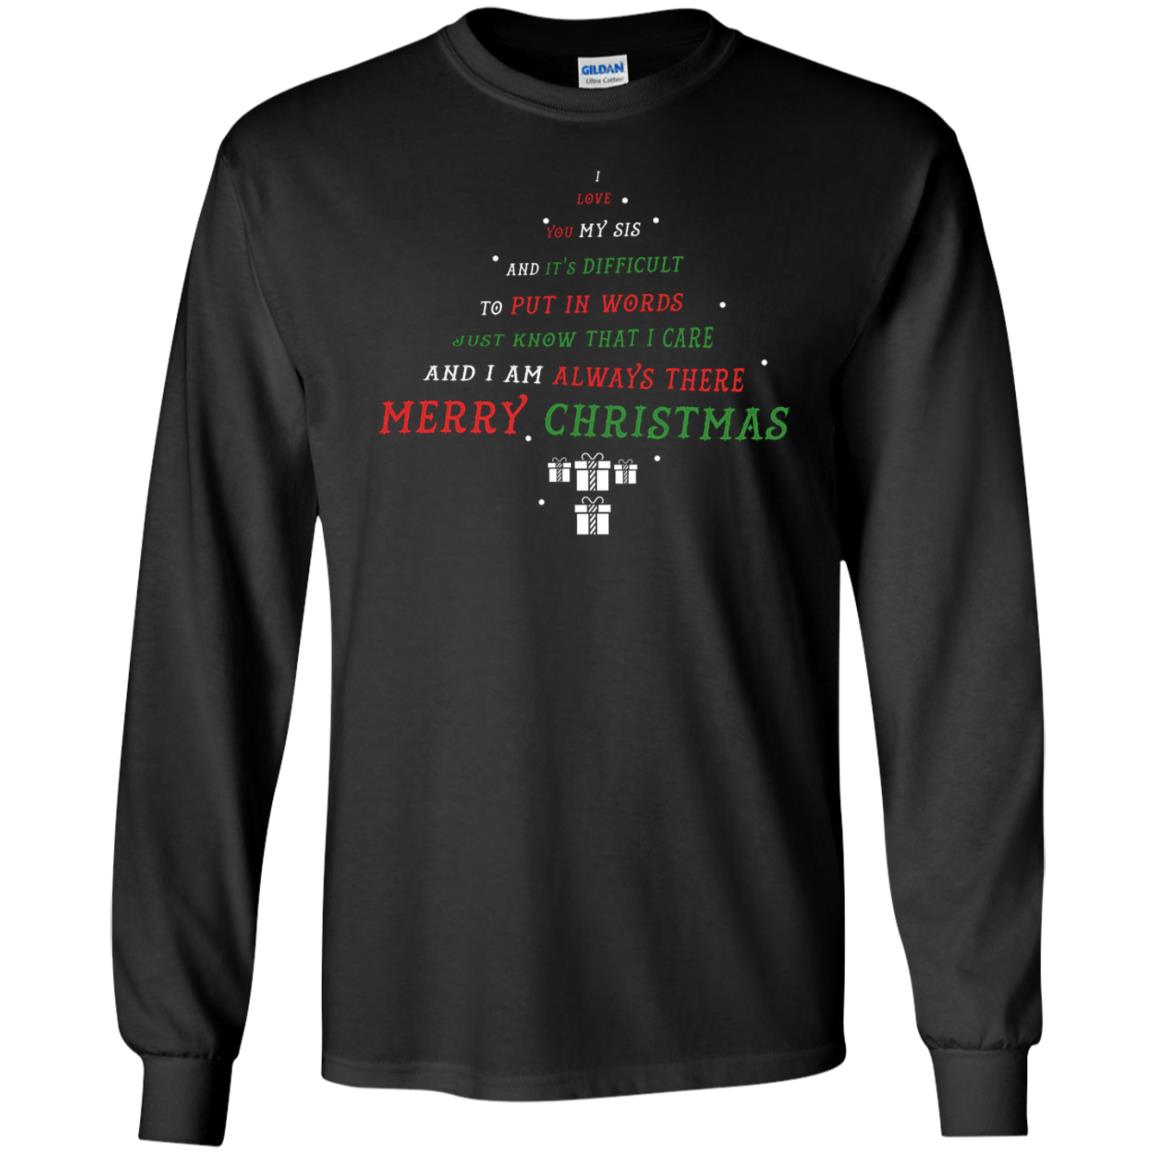 I Love You My Sis And Difficult To Put In Words Just Know That I Care  And I Am Always There Merry ChristmasG240 Gildan LS Ultra Cotton T-Shirt